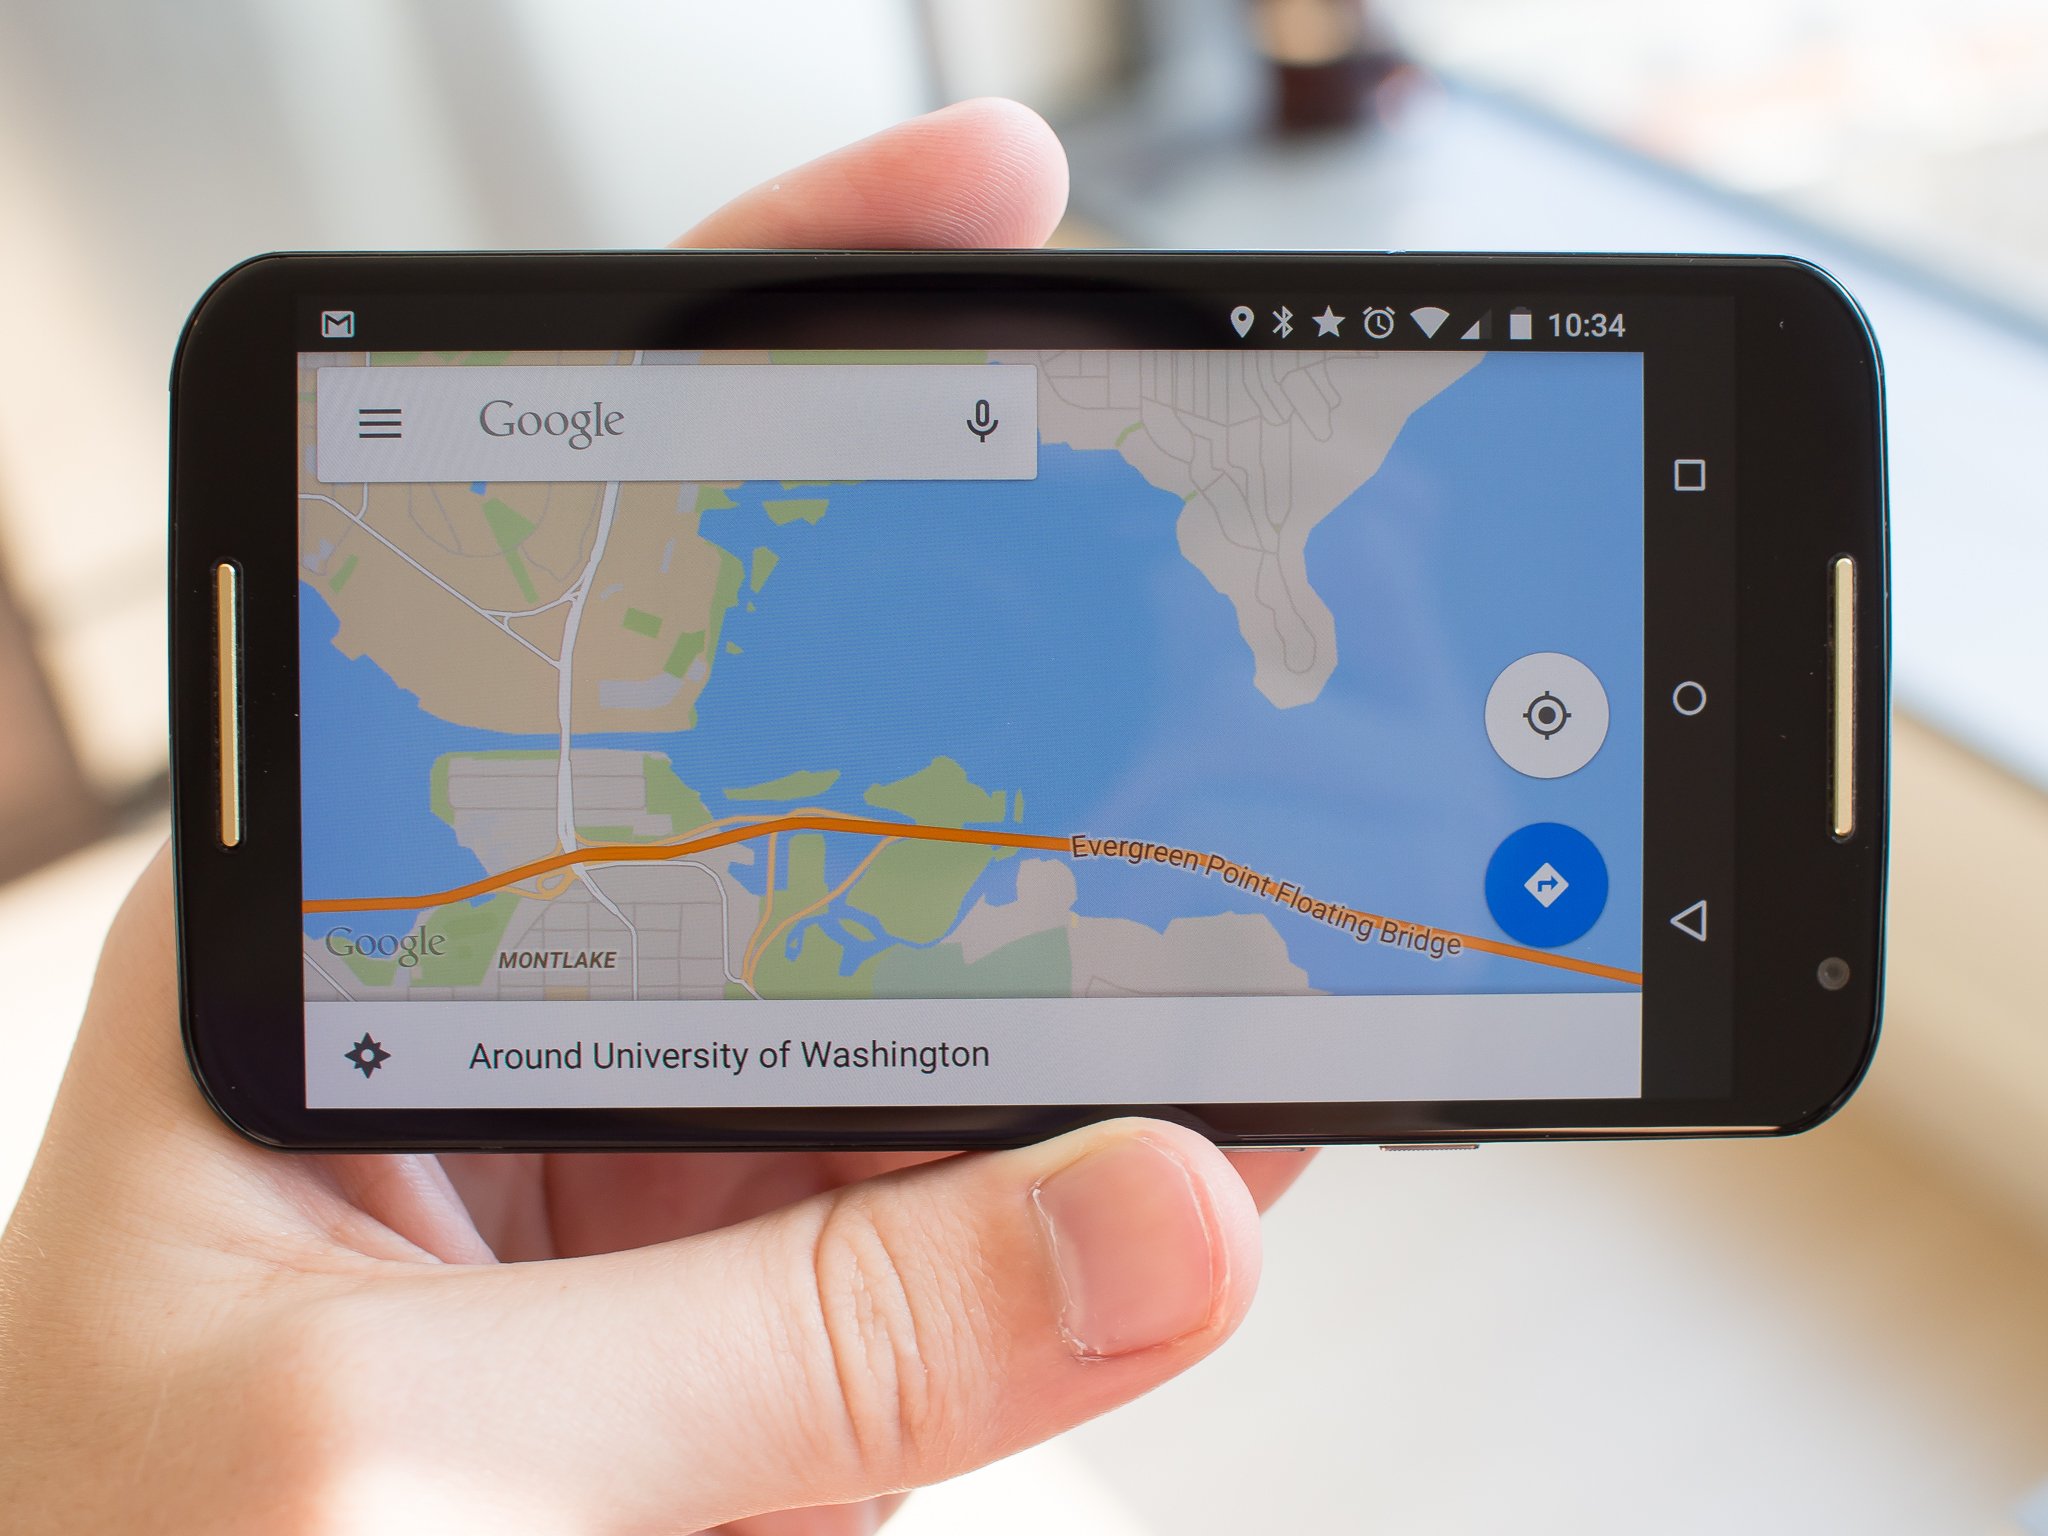 Google Maps in landscape on Android